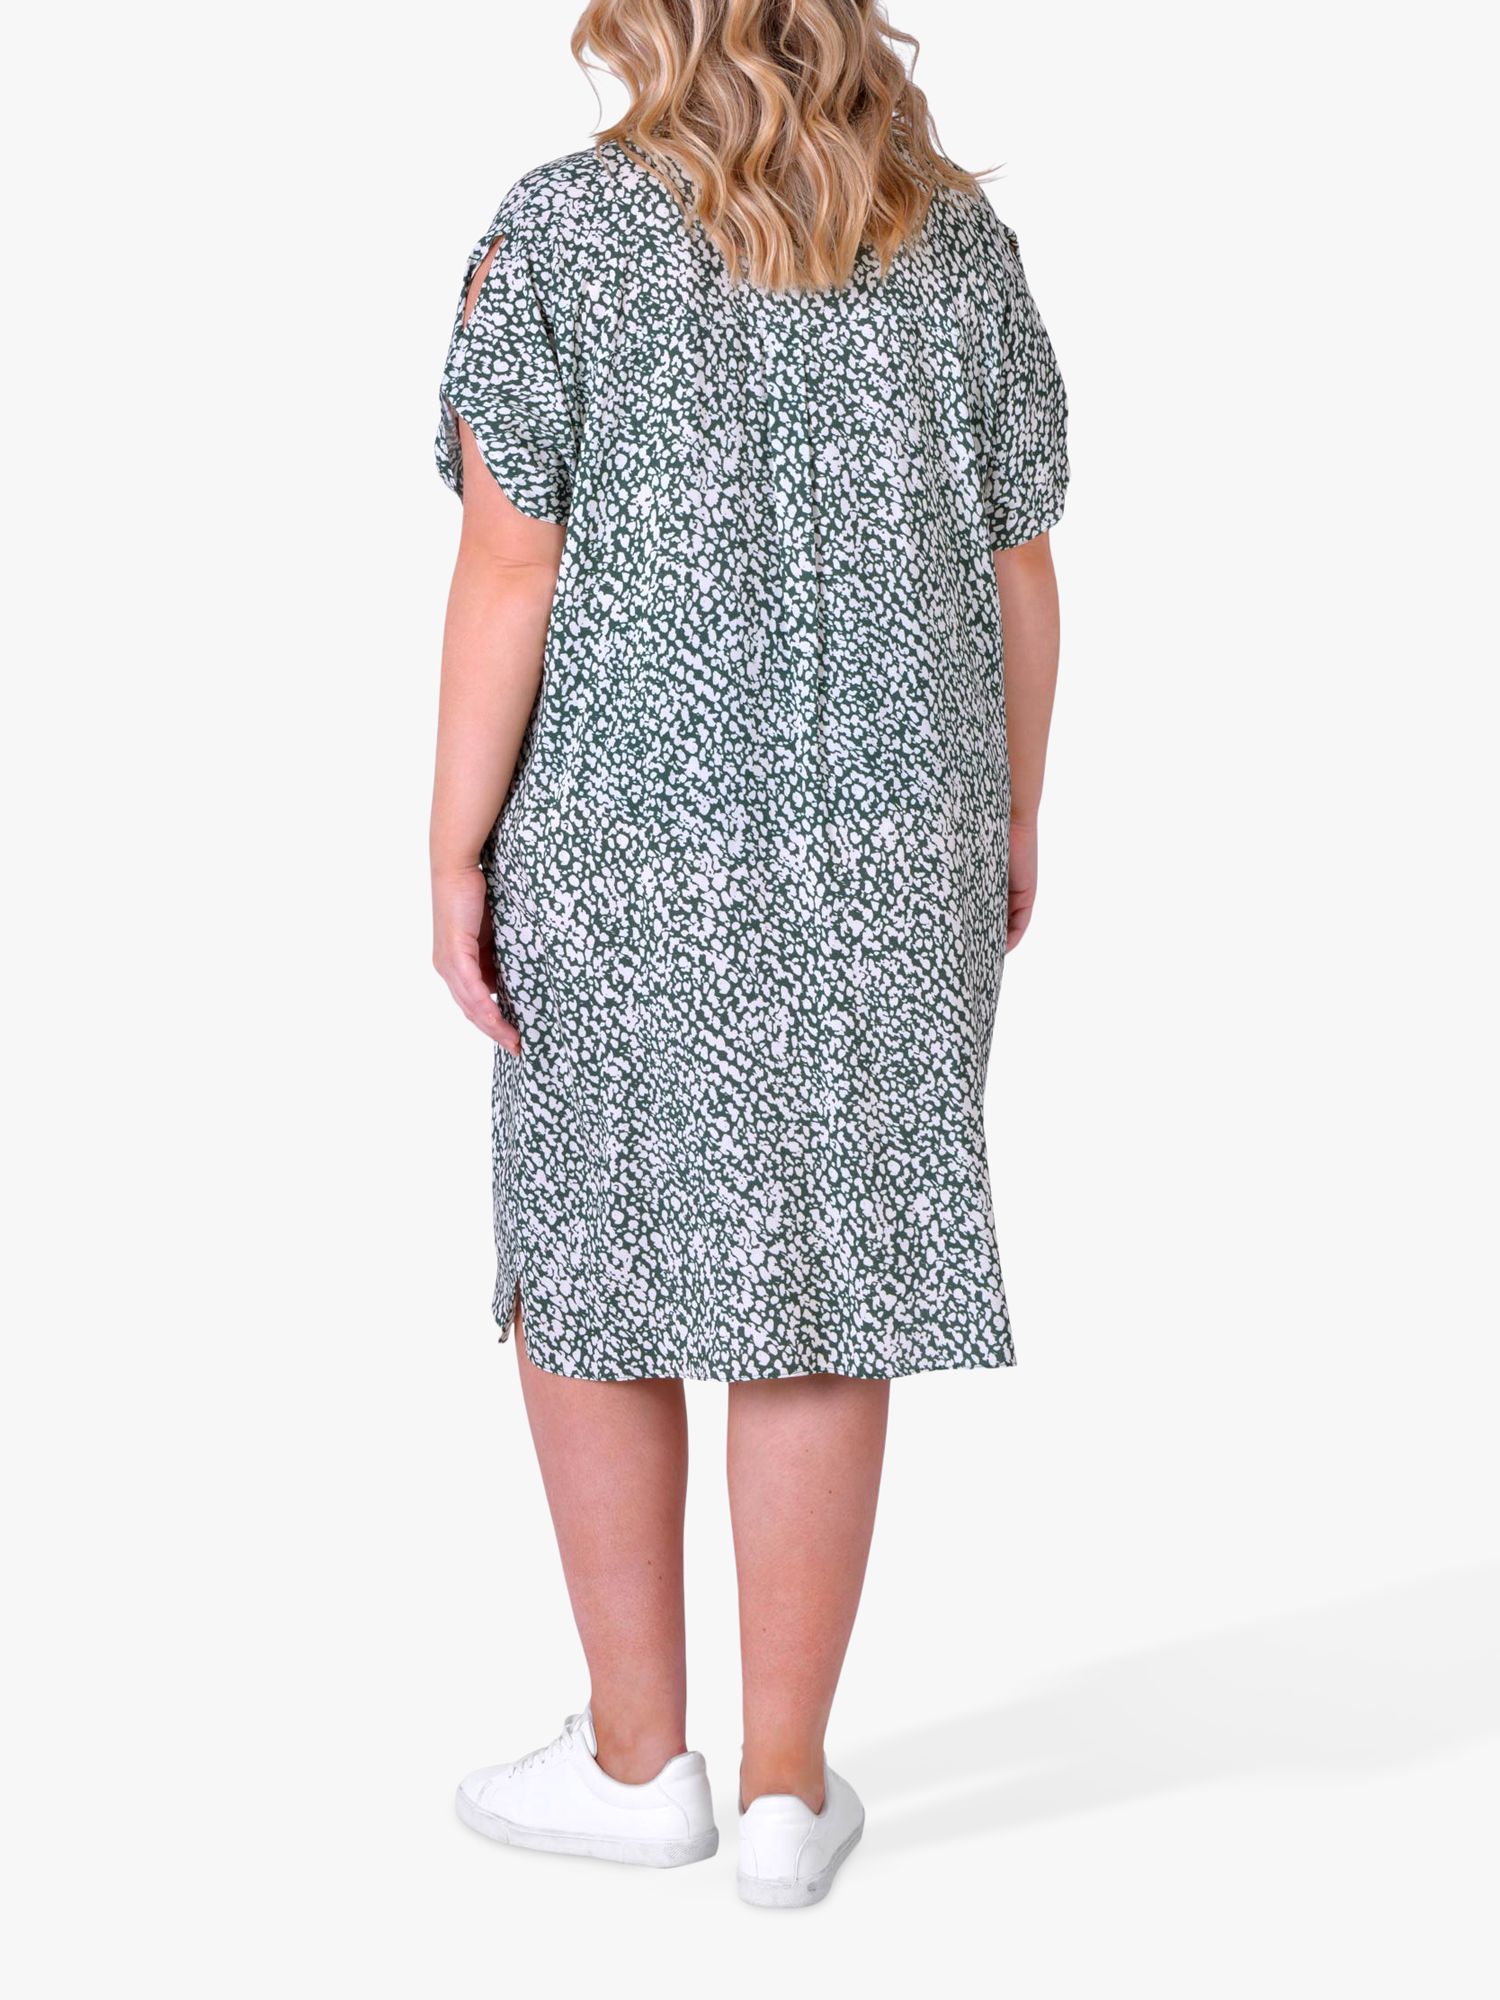 Buy Live Unlimited Animal Print Cocoon Shirt Dress, Green/Multi Online at johnlewis.com